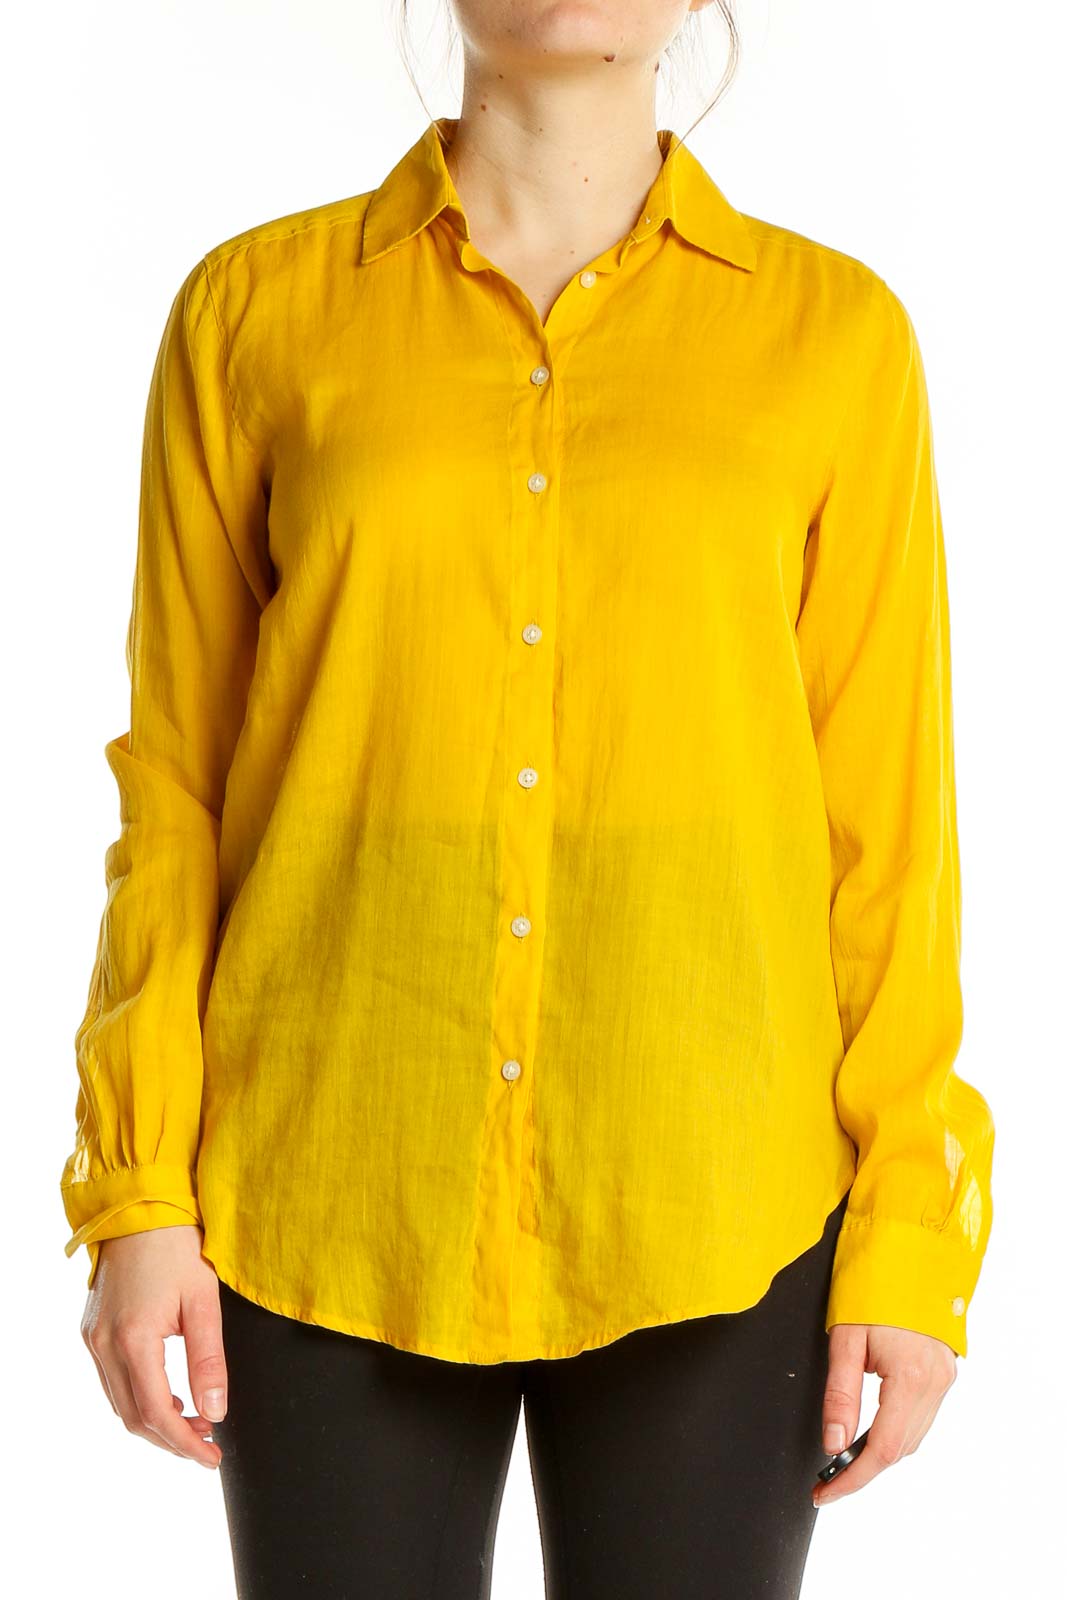 Yellow Collared Long Sleeve Shirt Front